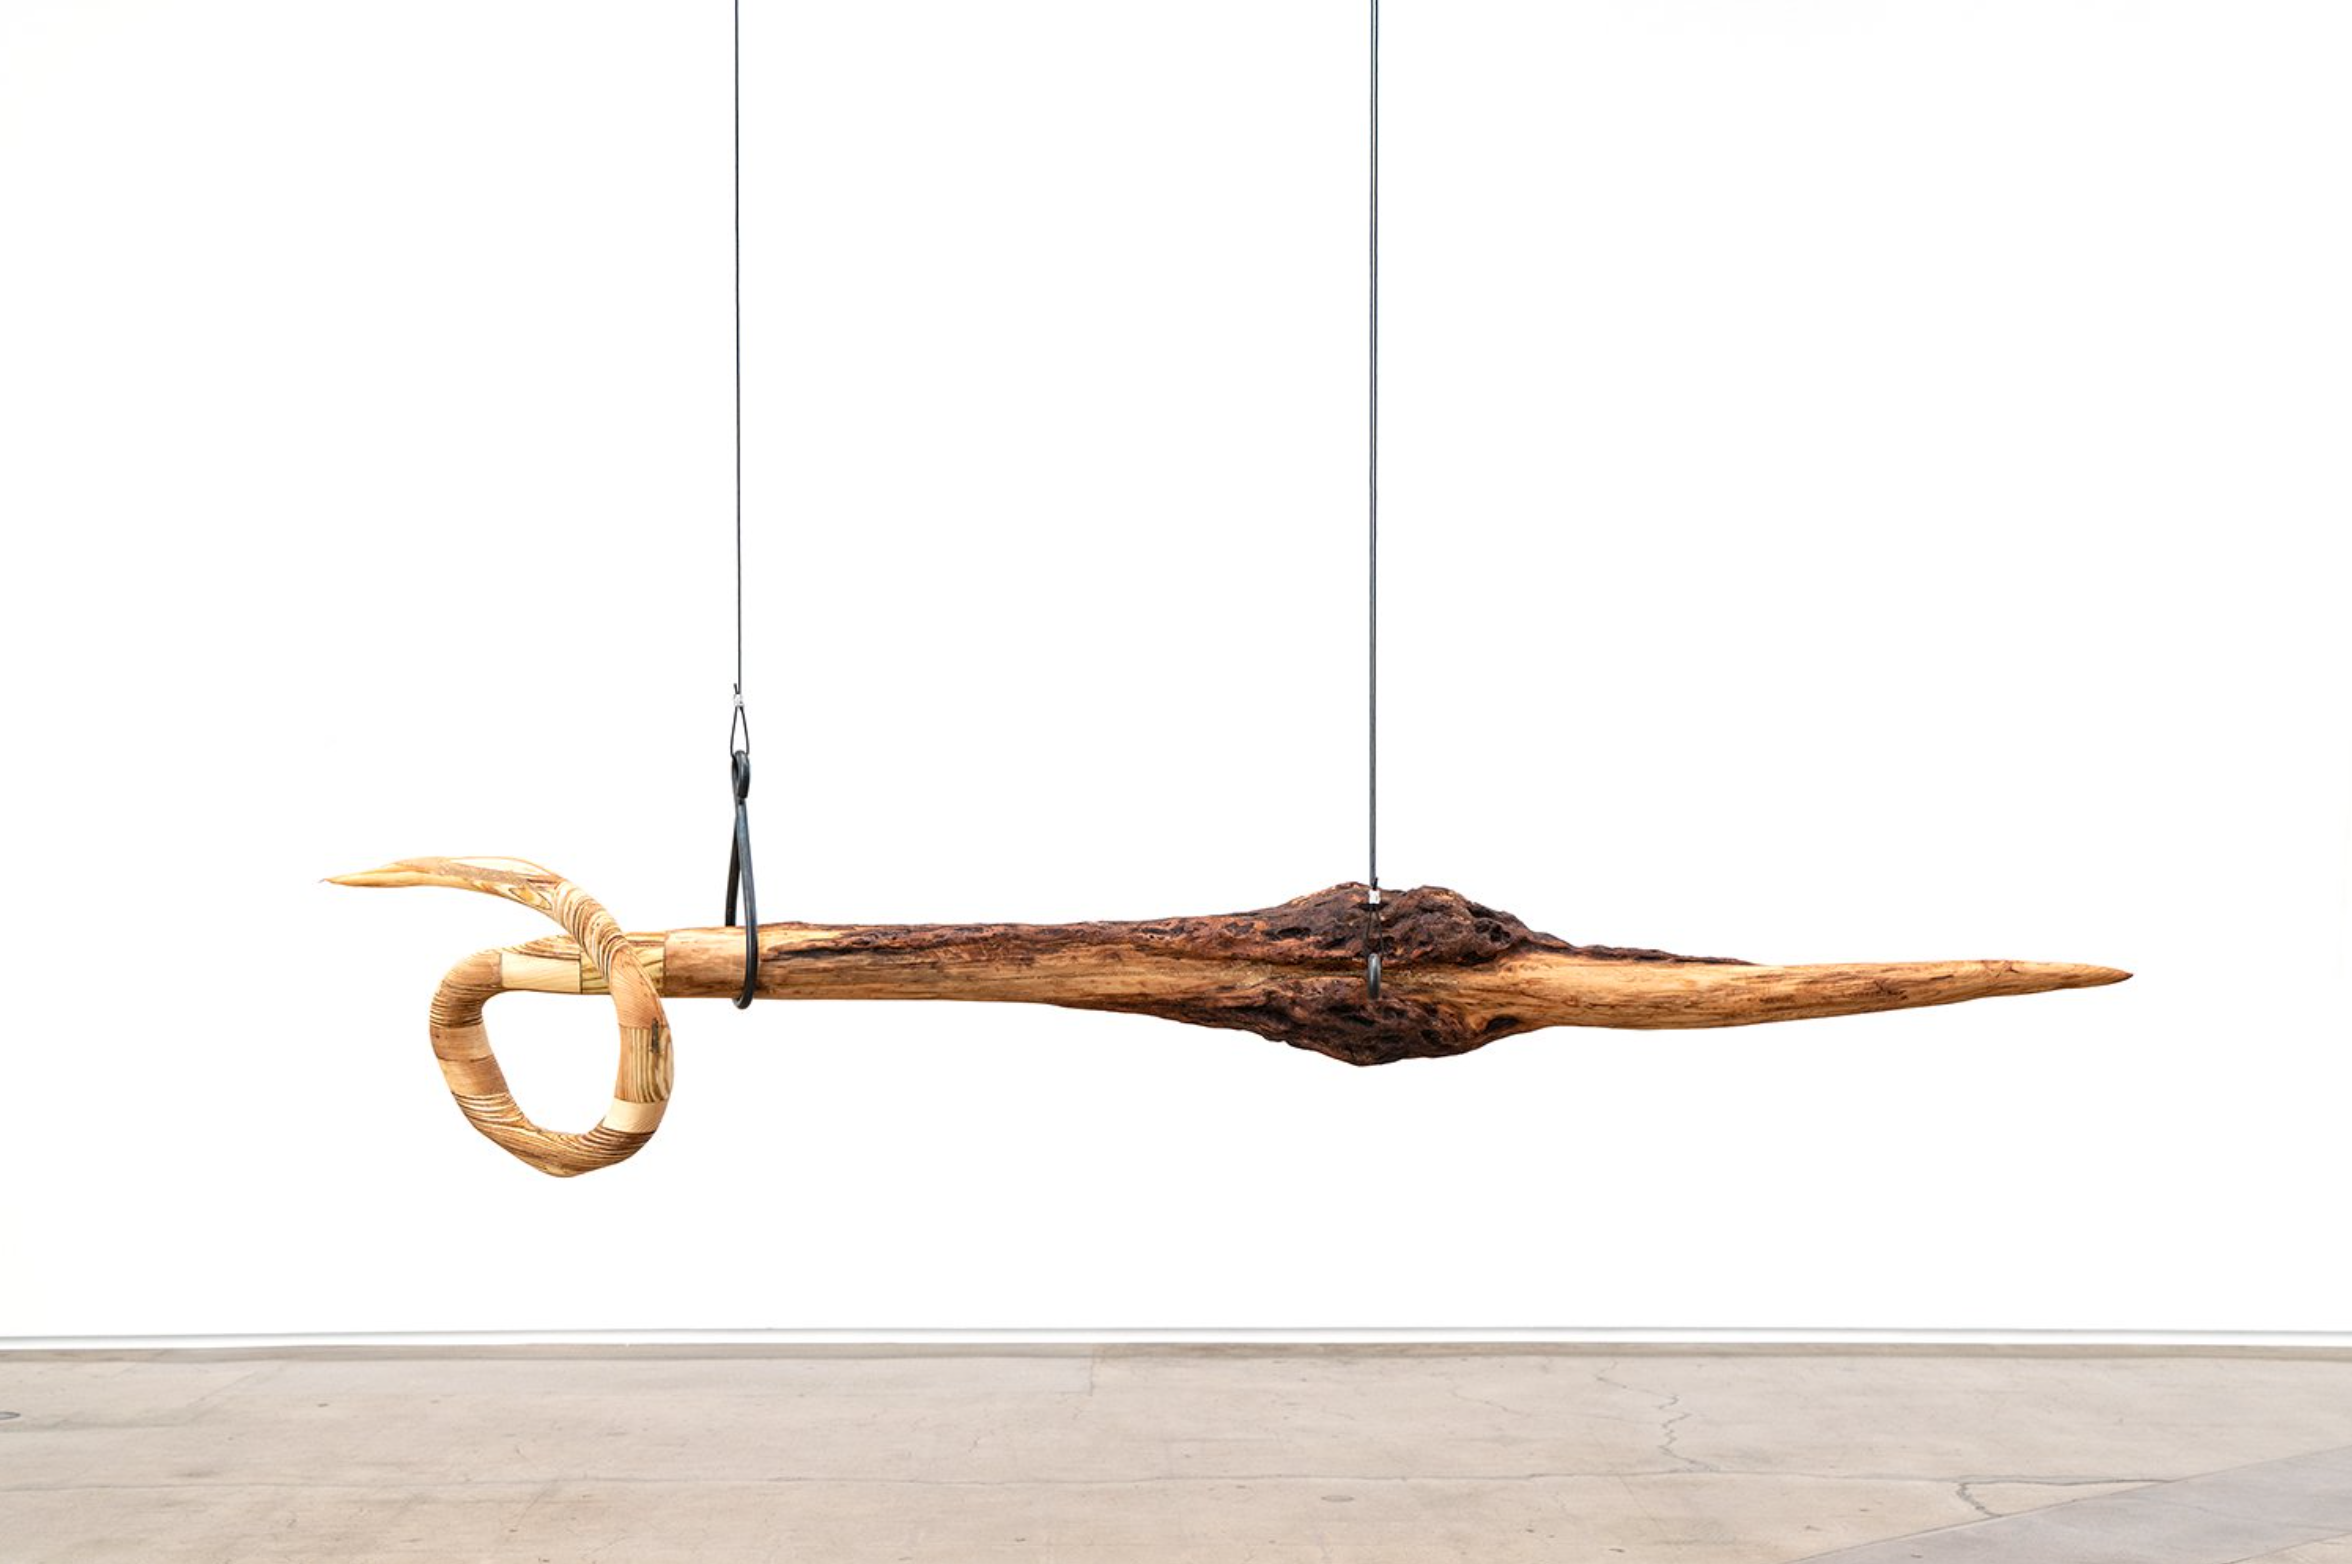   Alicia Adamerovich, "choking on my words," 2022, maple tree, found wood, forged steel rods and aircraft cable, 18 x 78 x 15 inches  